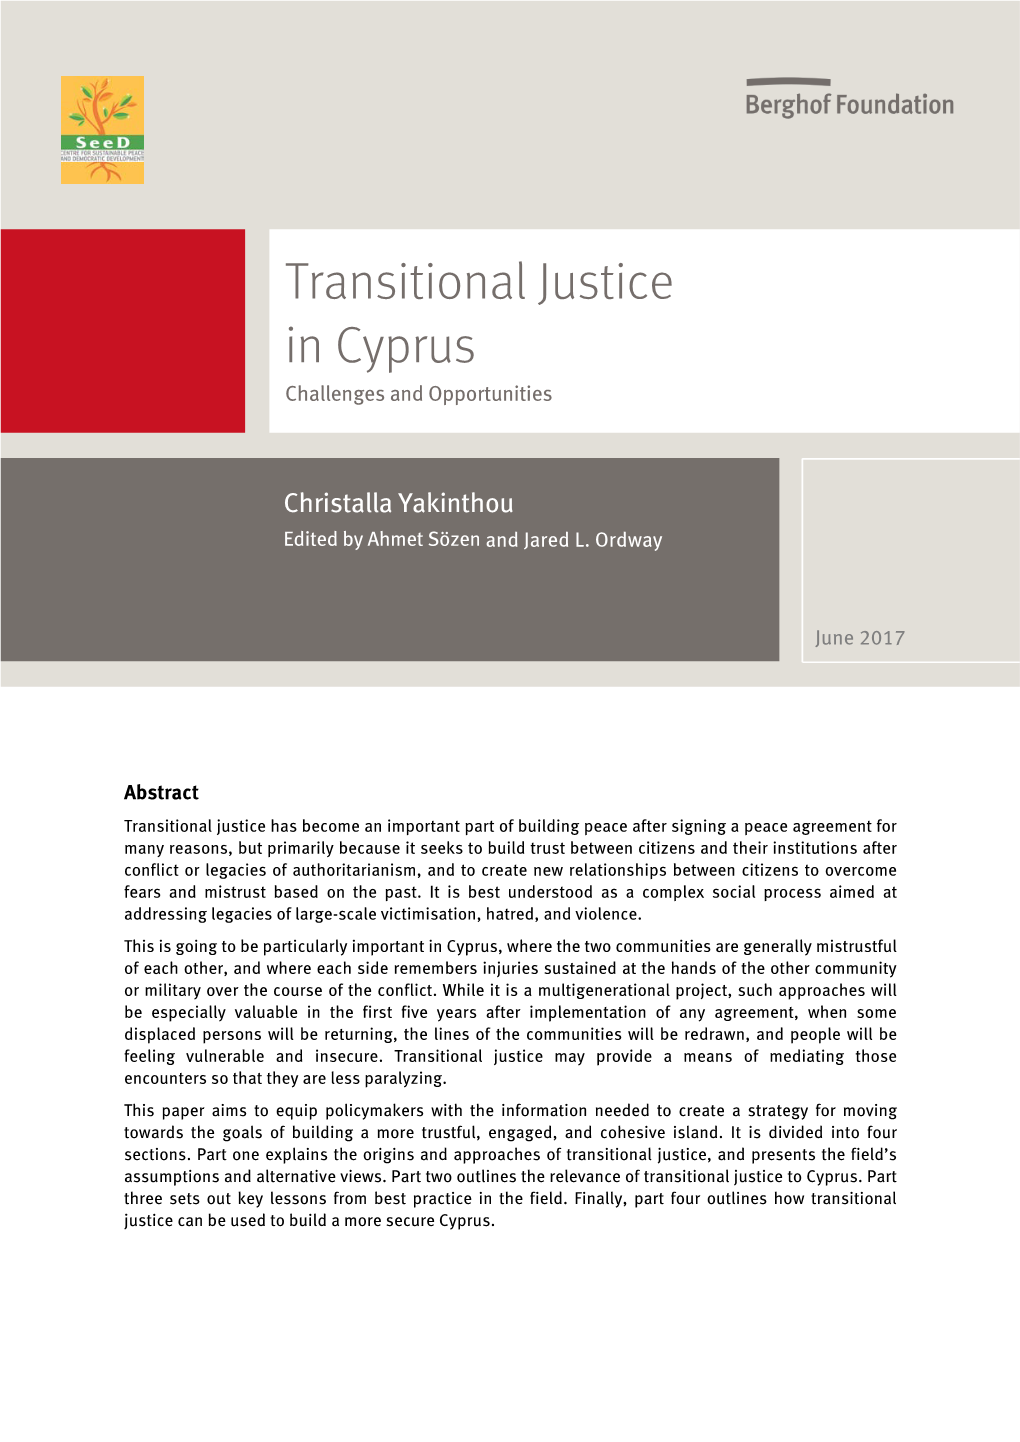 Transitional Justice in Cyprus: Challenges and Opportunities